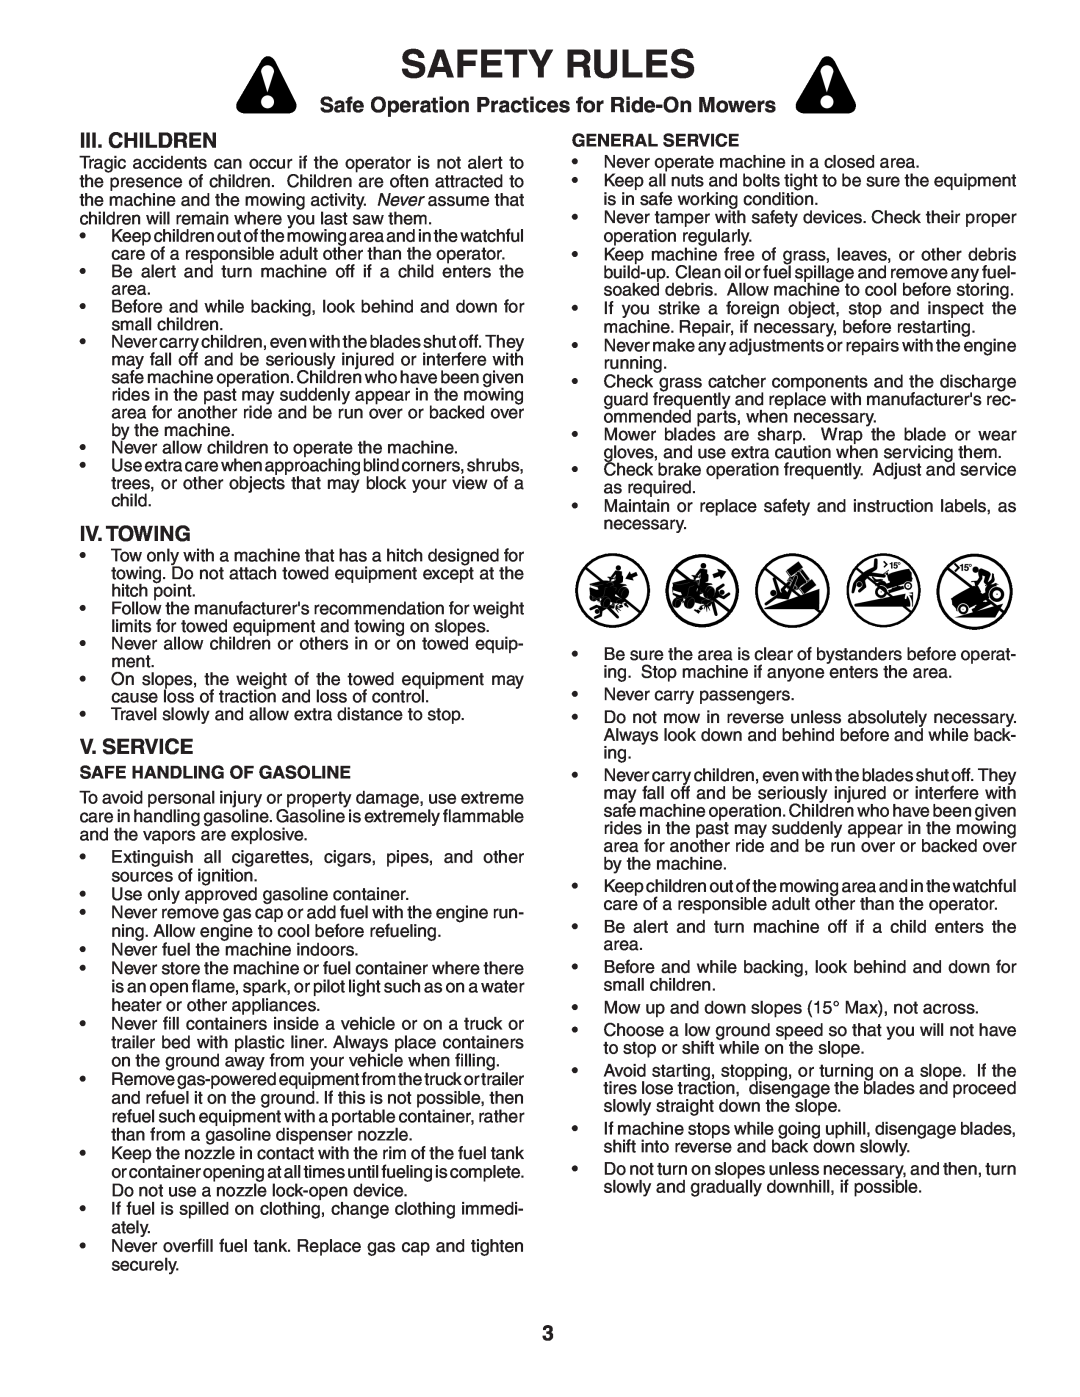 Poulan PB18H42LT manual Iii. Children, Iv. Towing, V. Service, Safety Rules, Safe Operation Practices for Ride-OnMowers 